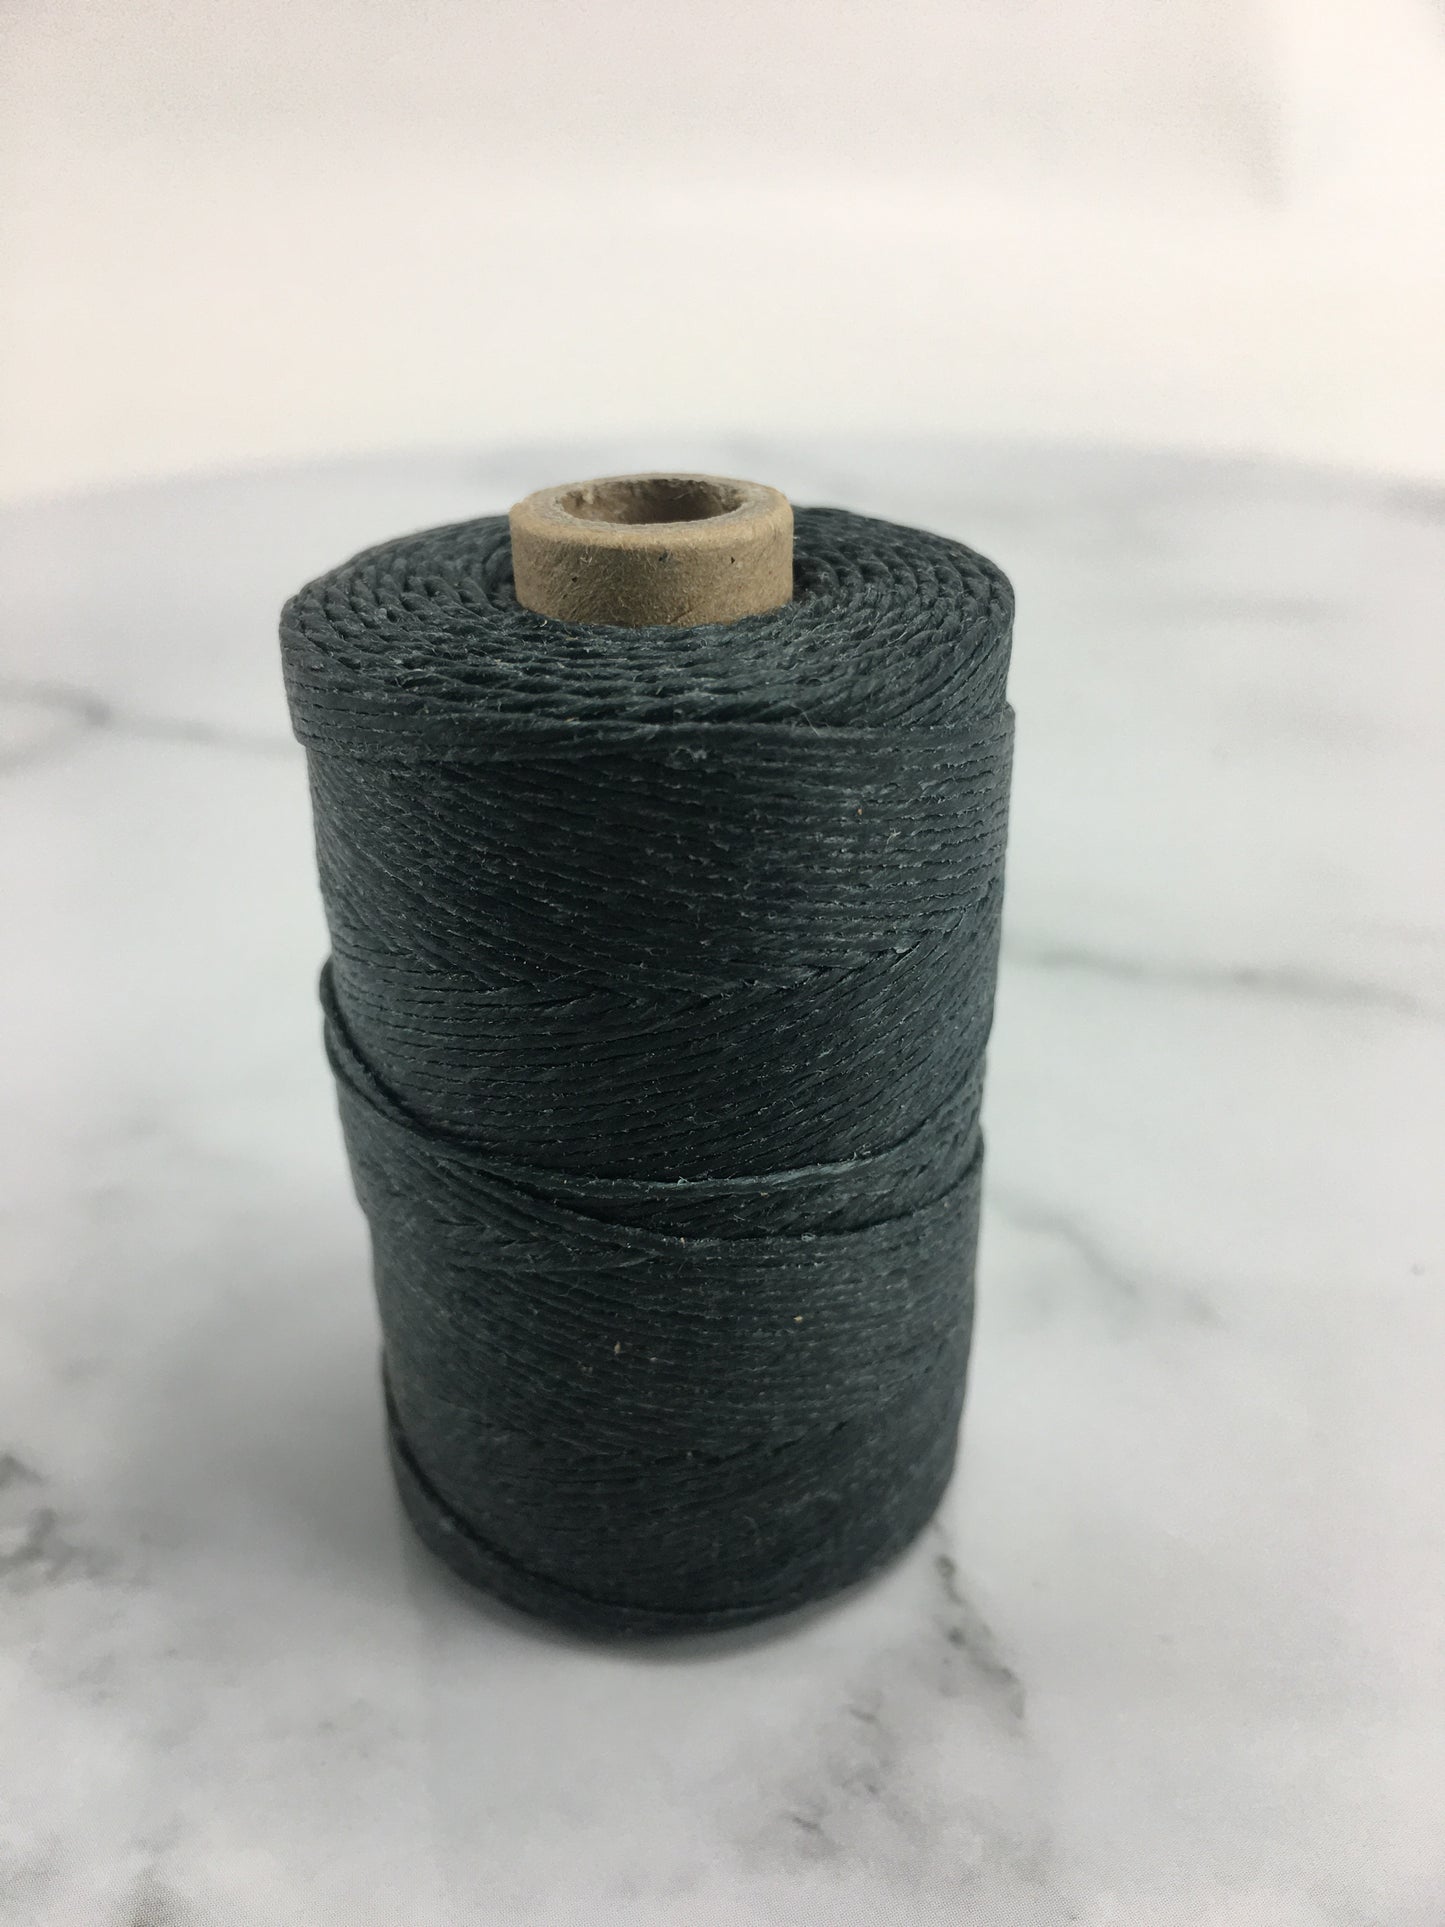 Umber Black- Per spool 50g- 100% Pure Linen Thread- Waxed- 18/4 No.18 Cord 4- Approx 1mm thick